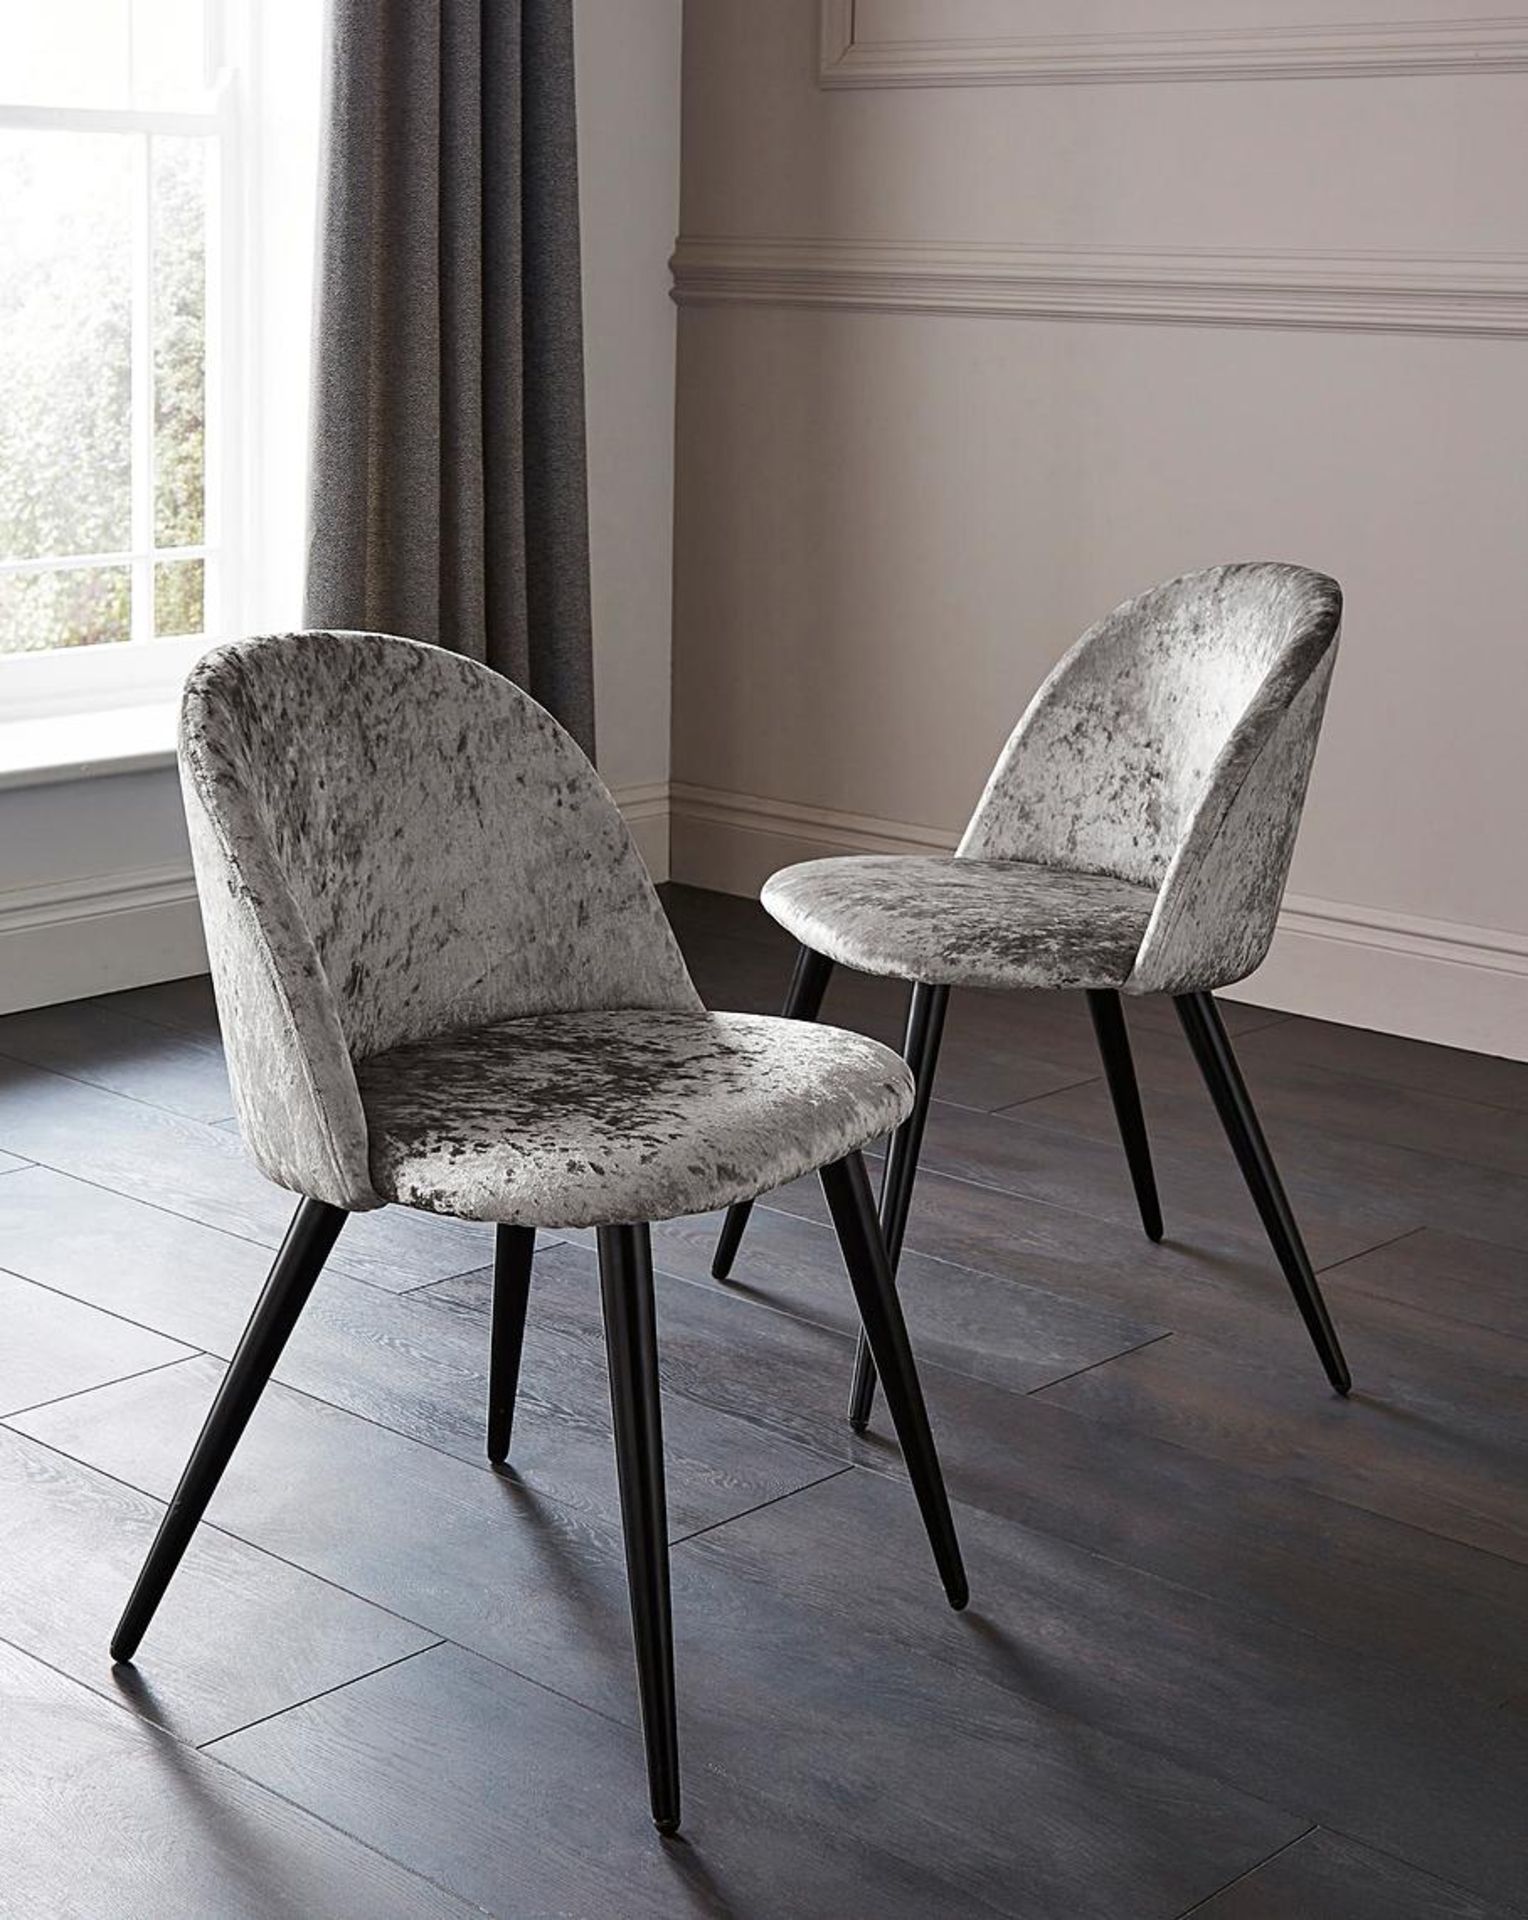 Palazzo Crushed Velvet Pair of Dining Chairs. - SR5. RRP £229.99. Add some glitz and glamour to your